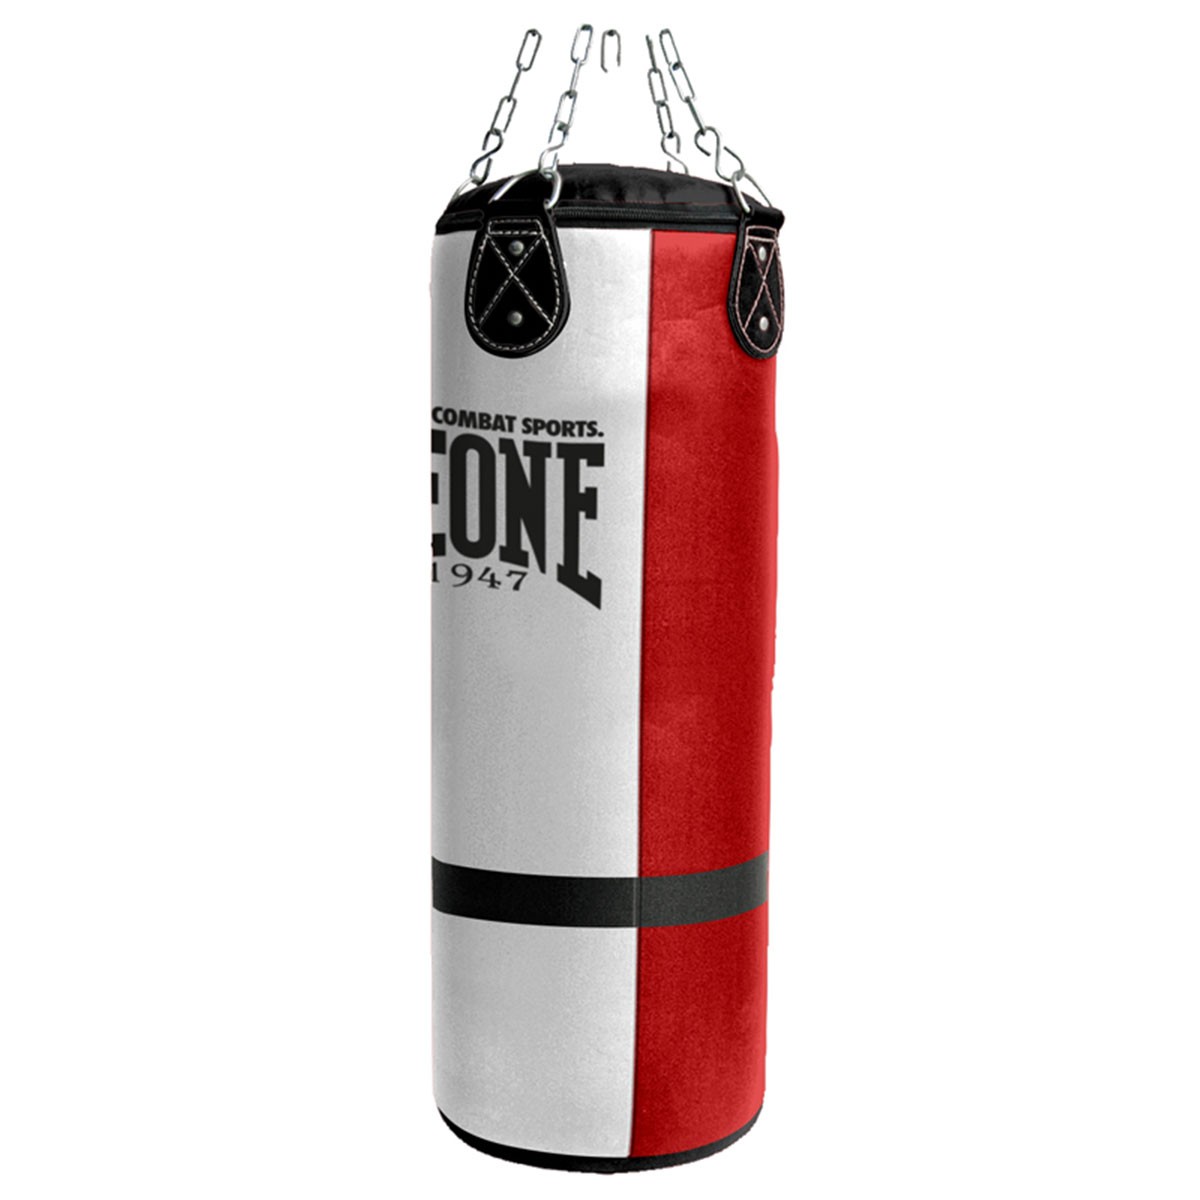 Morrama boxes clever with connected at-home punching bag - Design Week